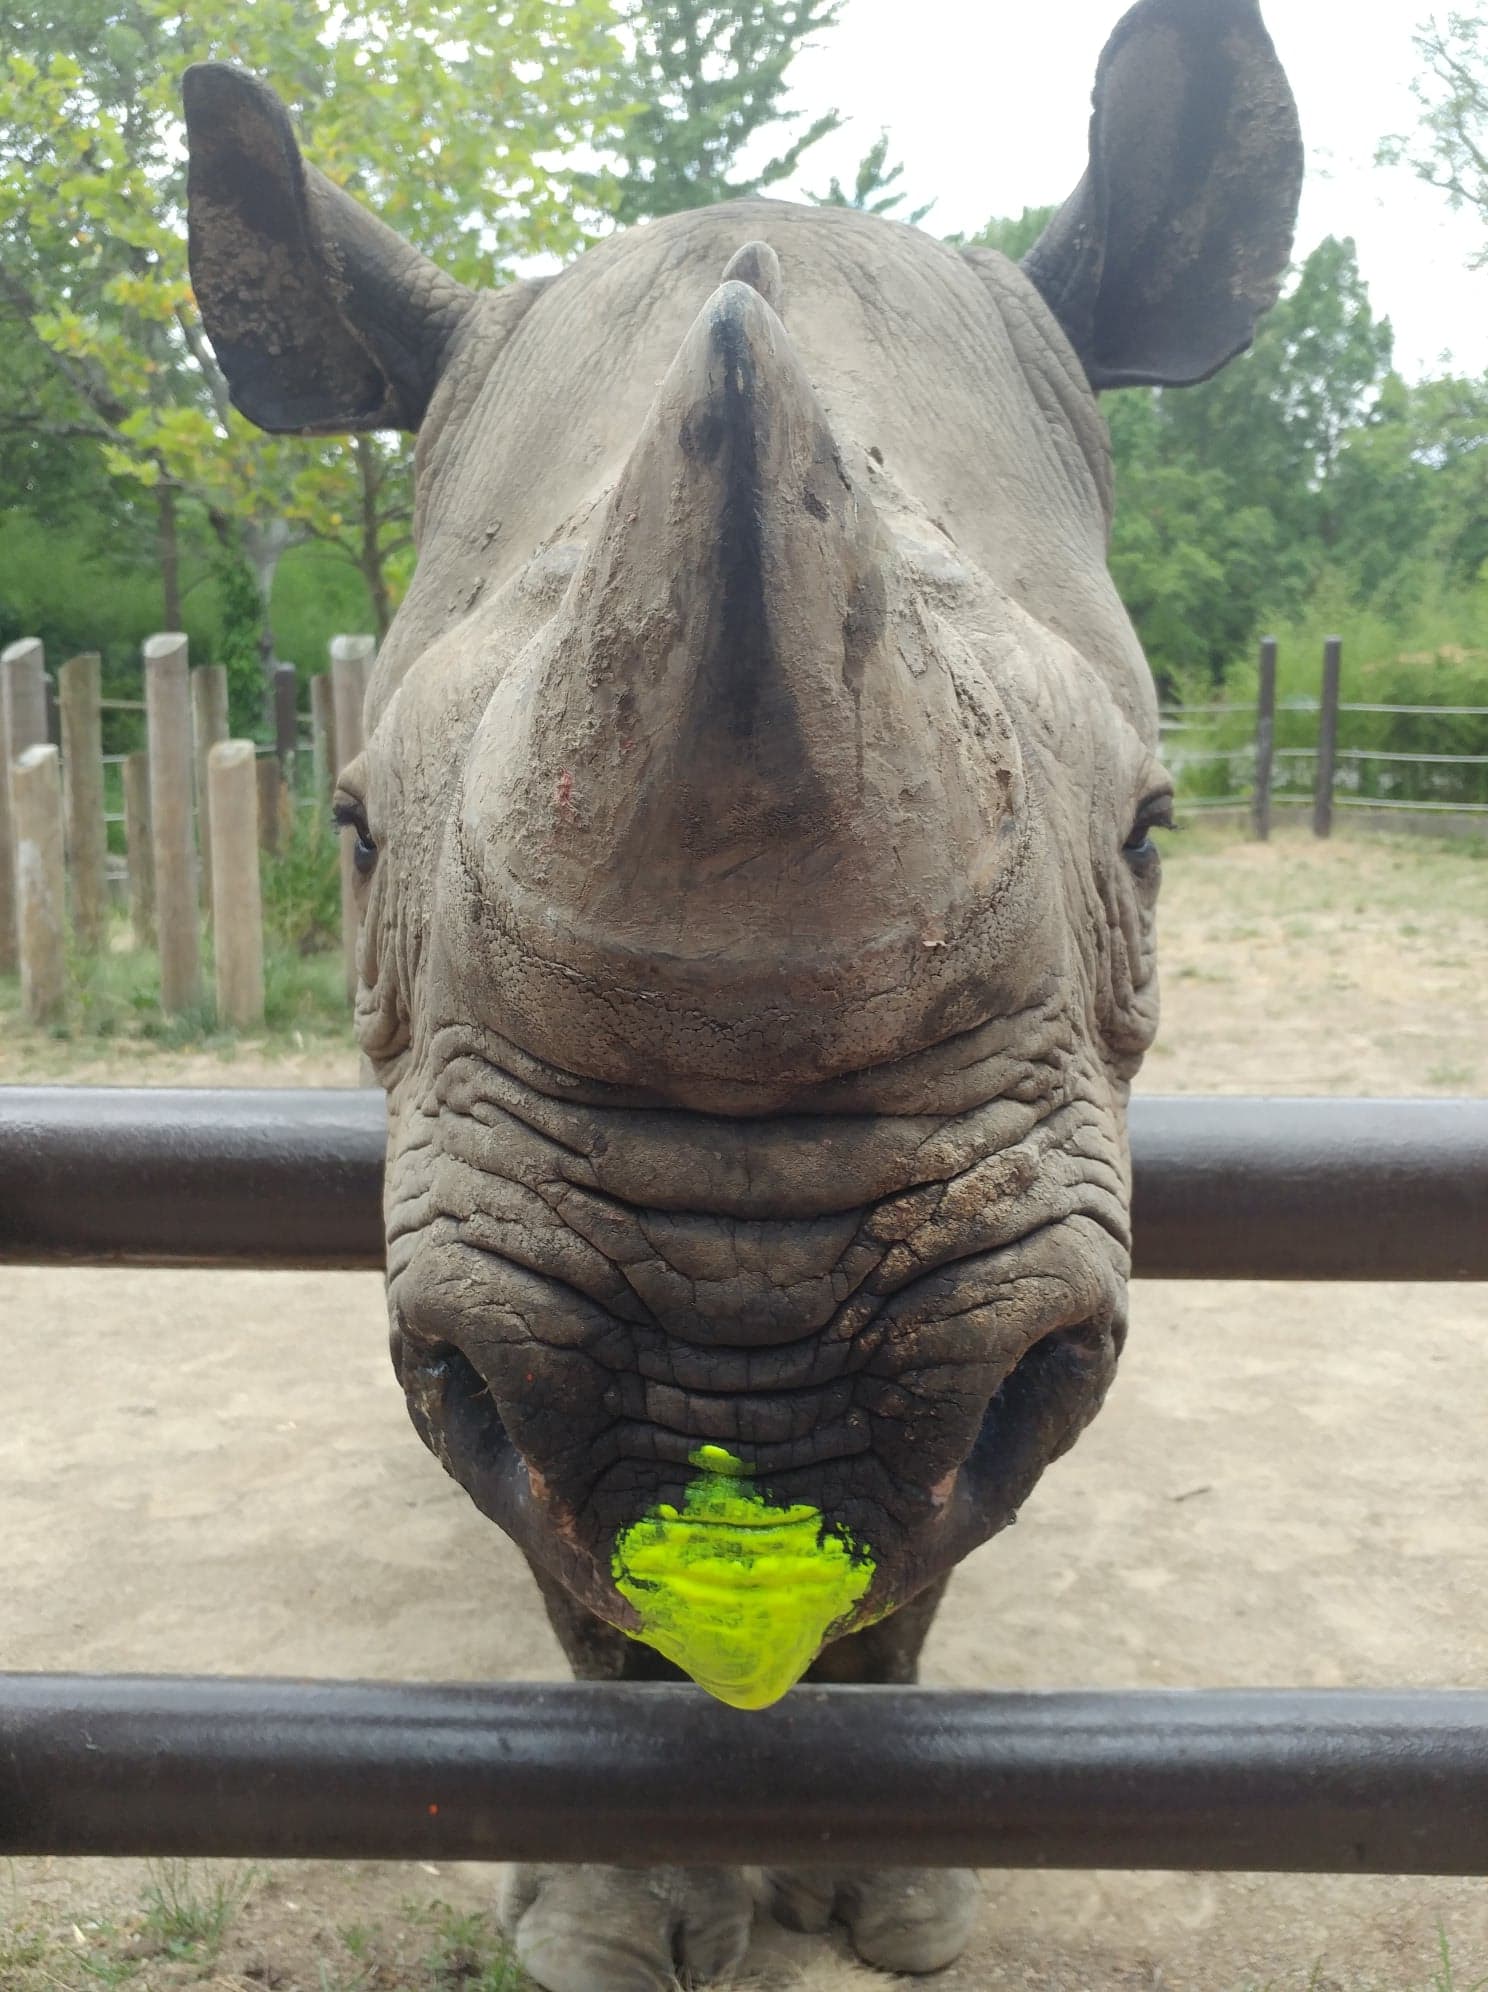 Rosie the Rhino at the Columbus Zoo with paint on her lip